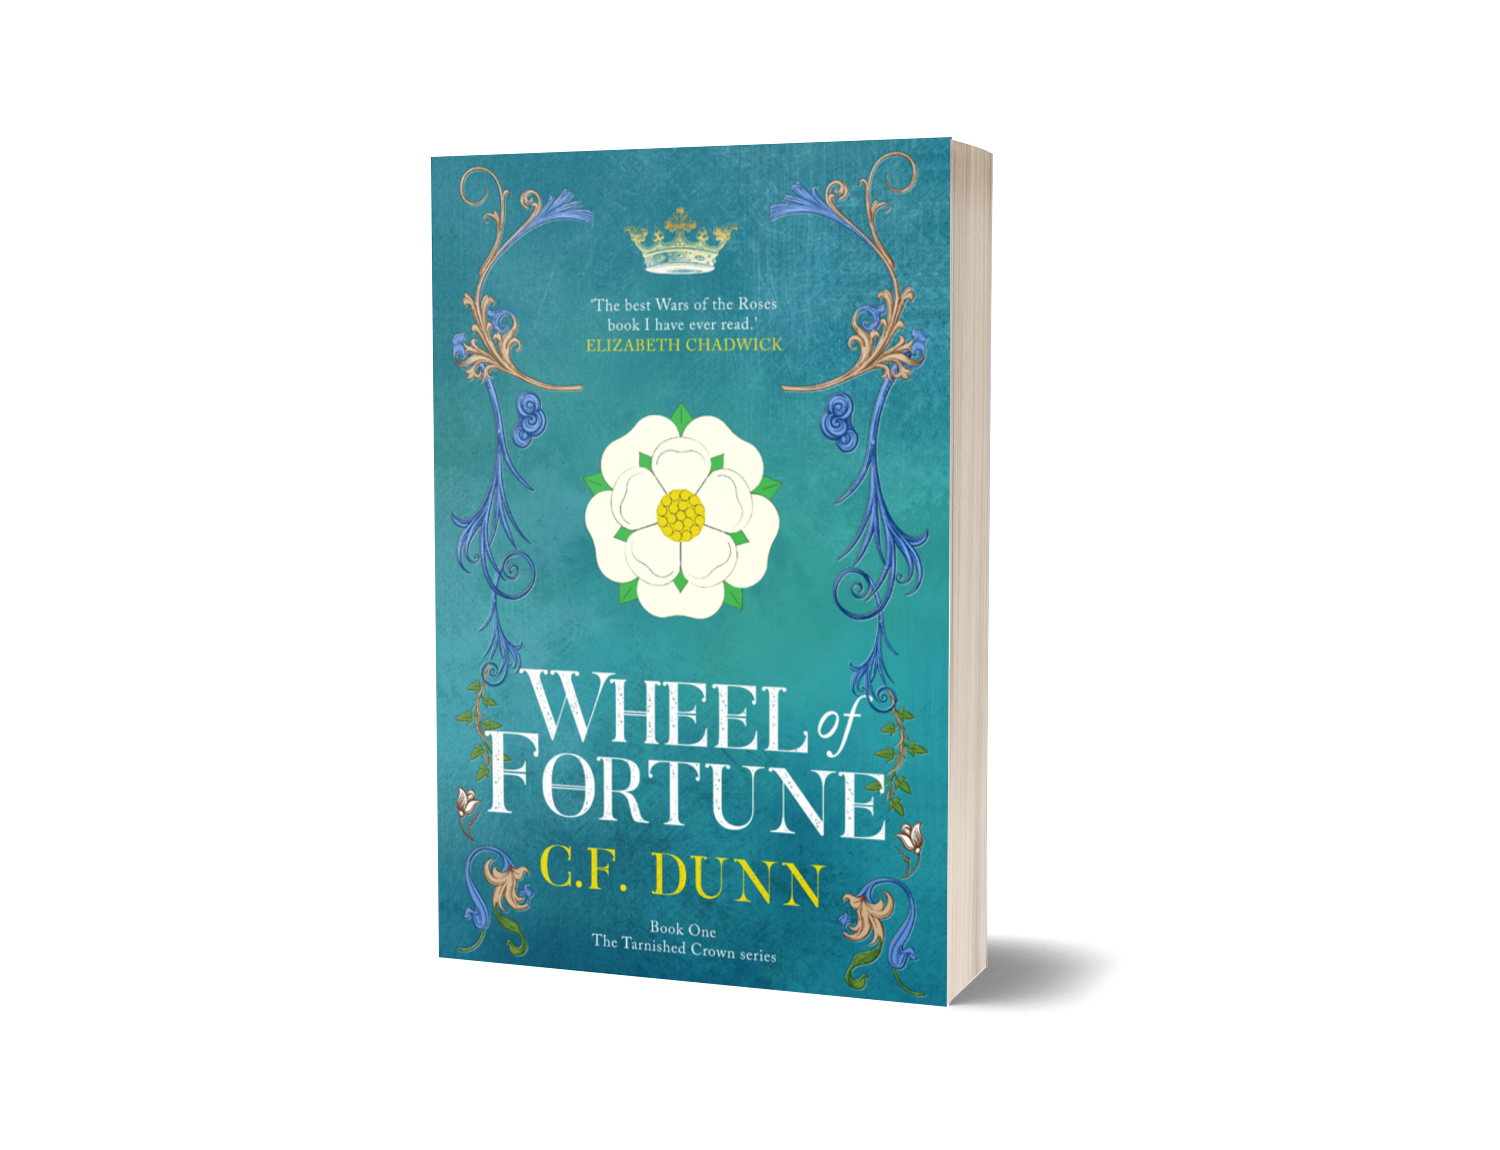 Wheel of Fortune by C.F Dunn